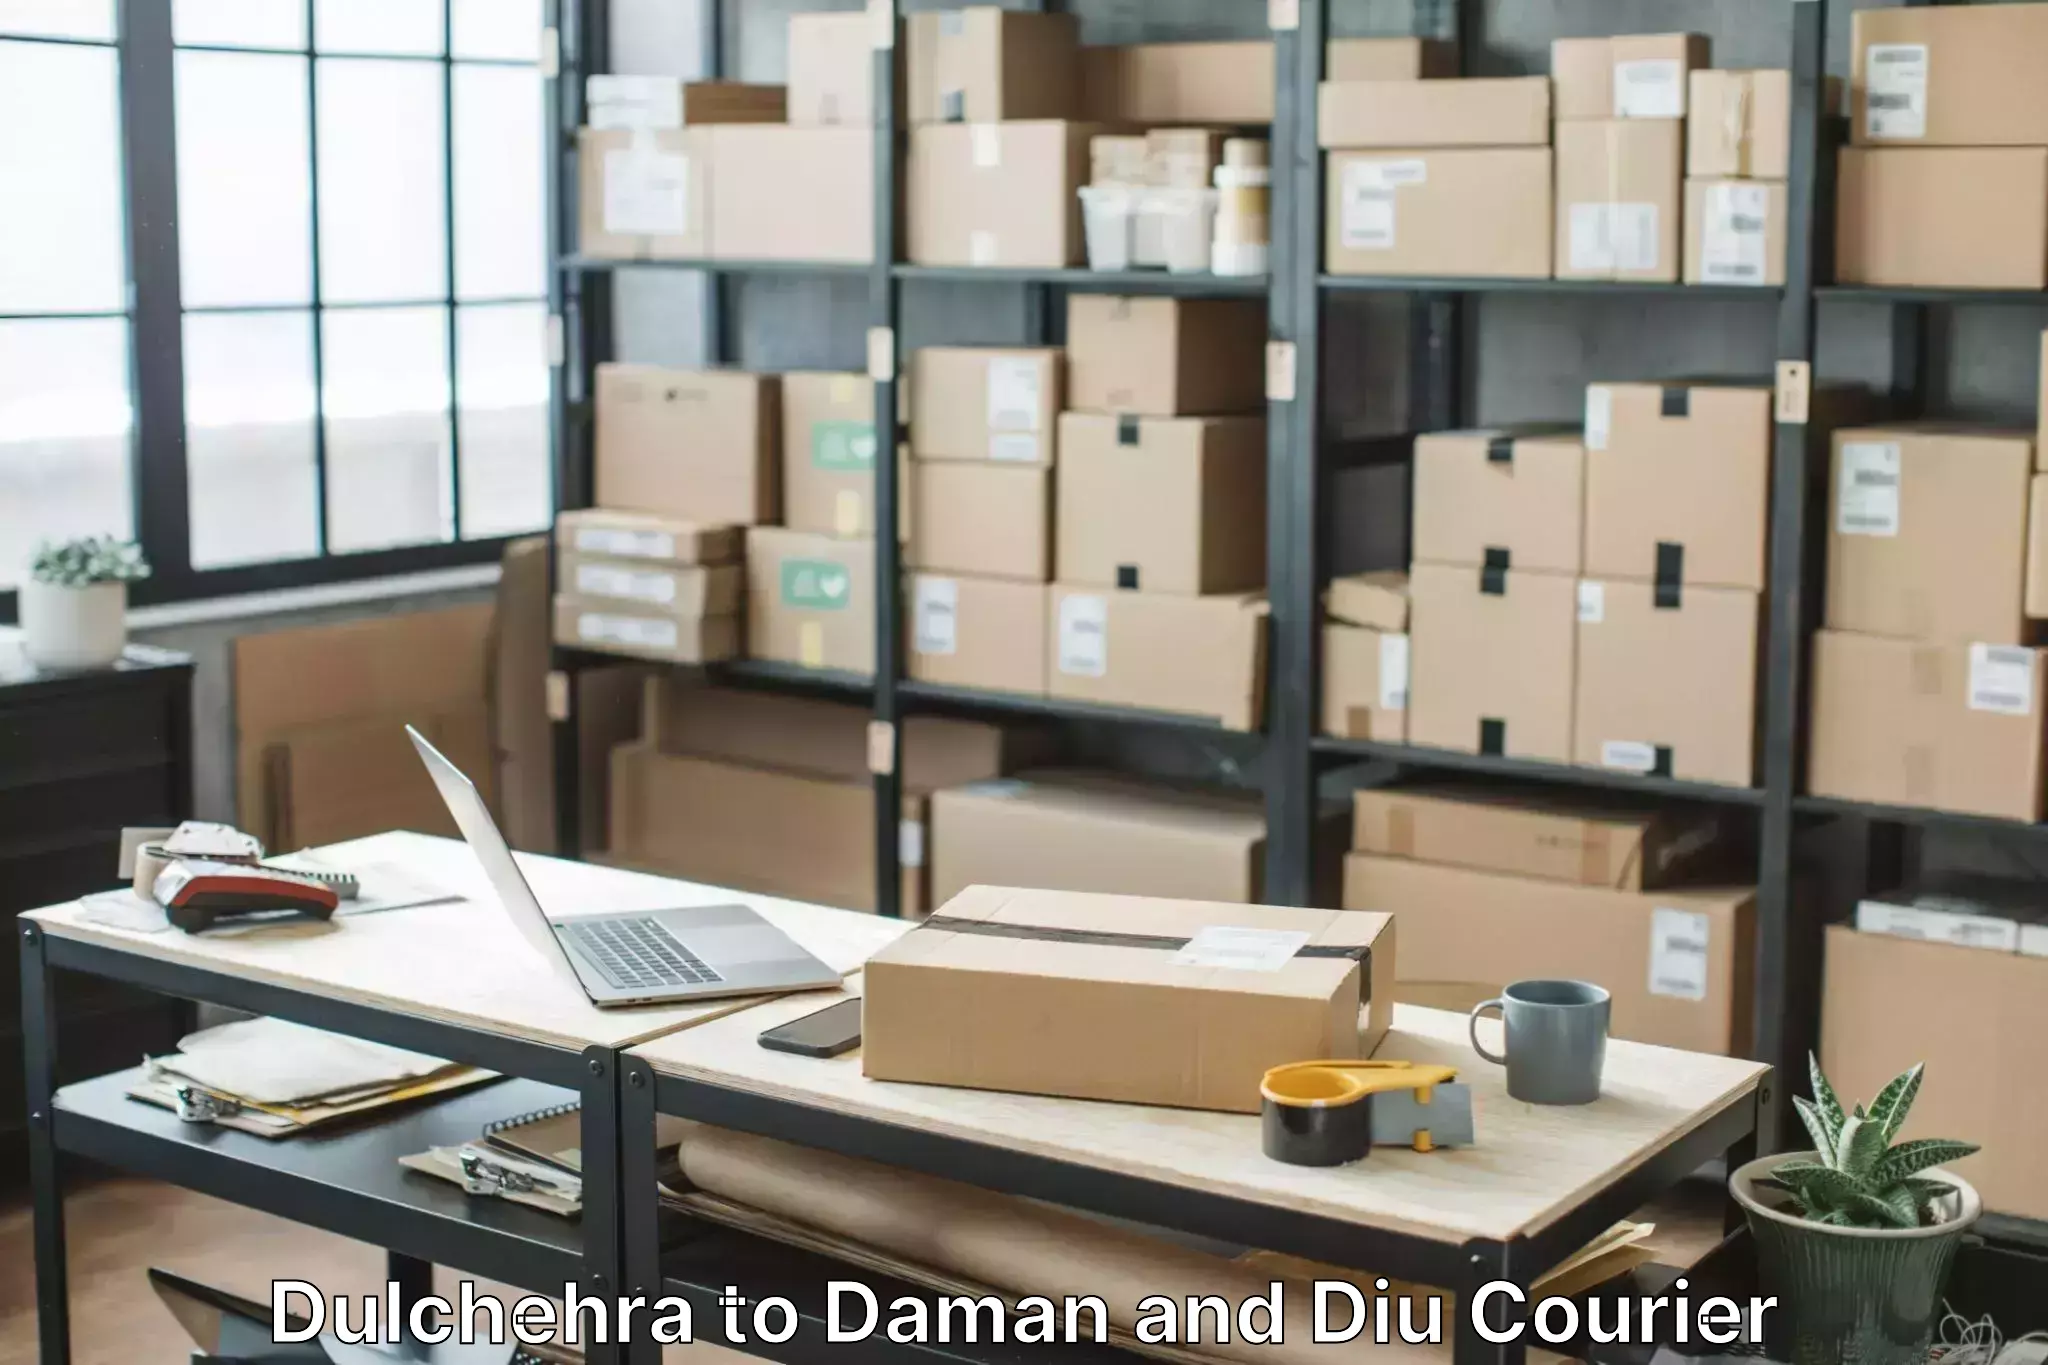 Cost-effective moving solutions Dulchehra to Diu